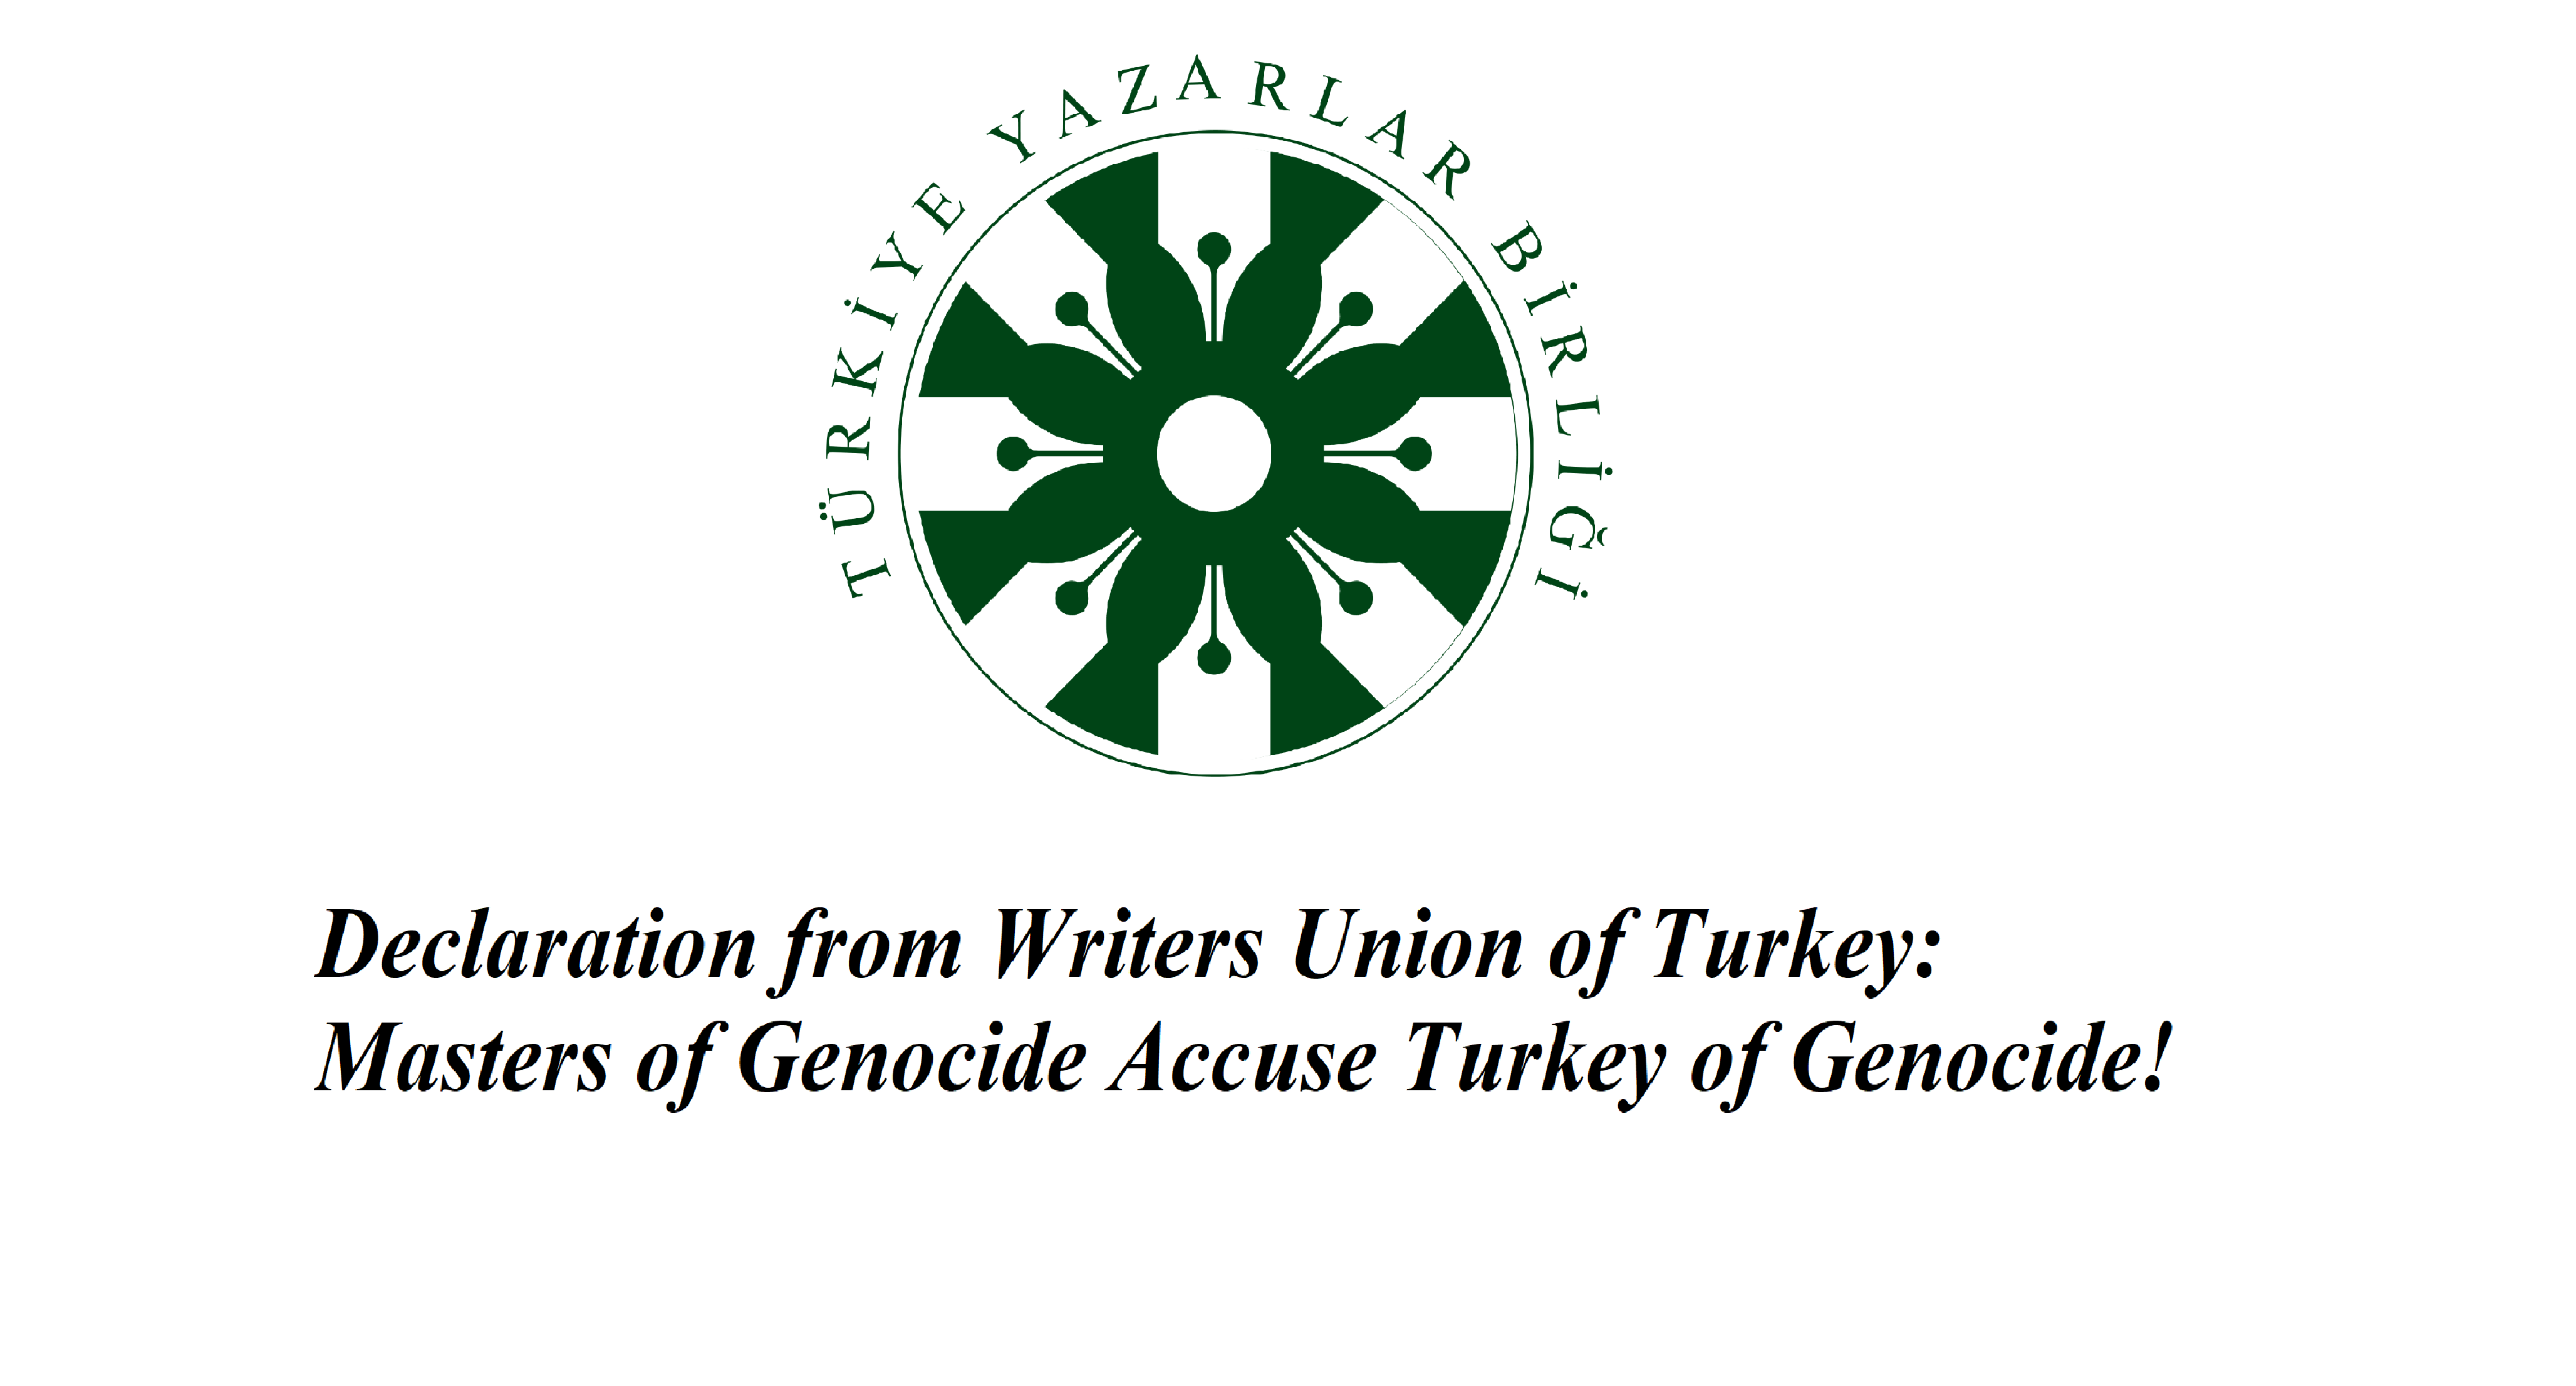 Declaration from Writers Union of Turkey: Masters of Genocide Accuse Turkey of Genocide!